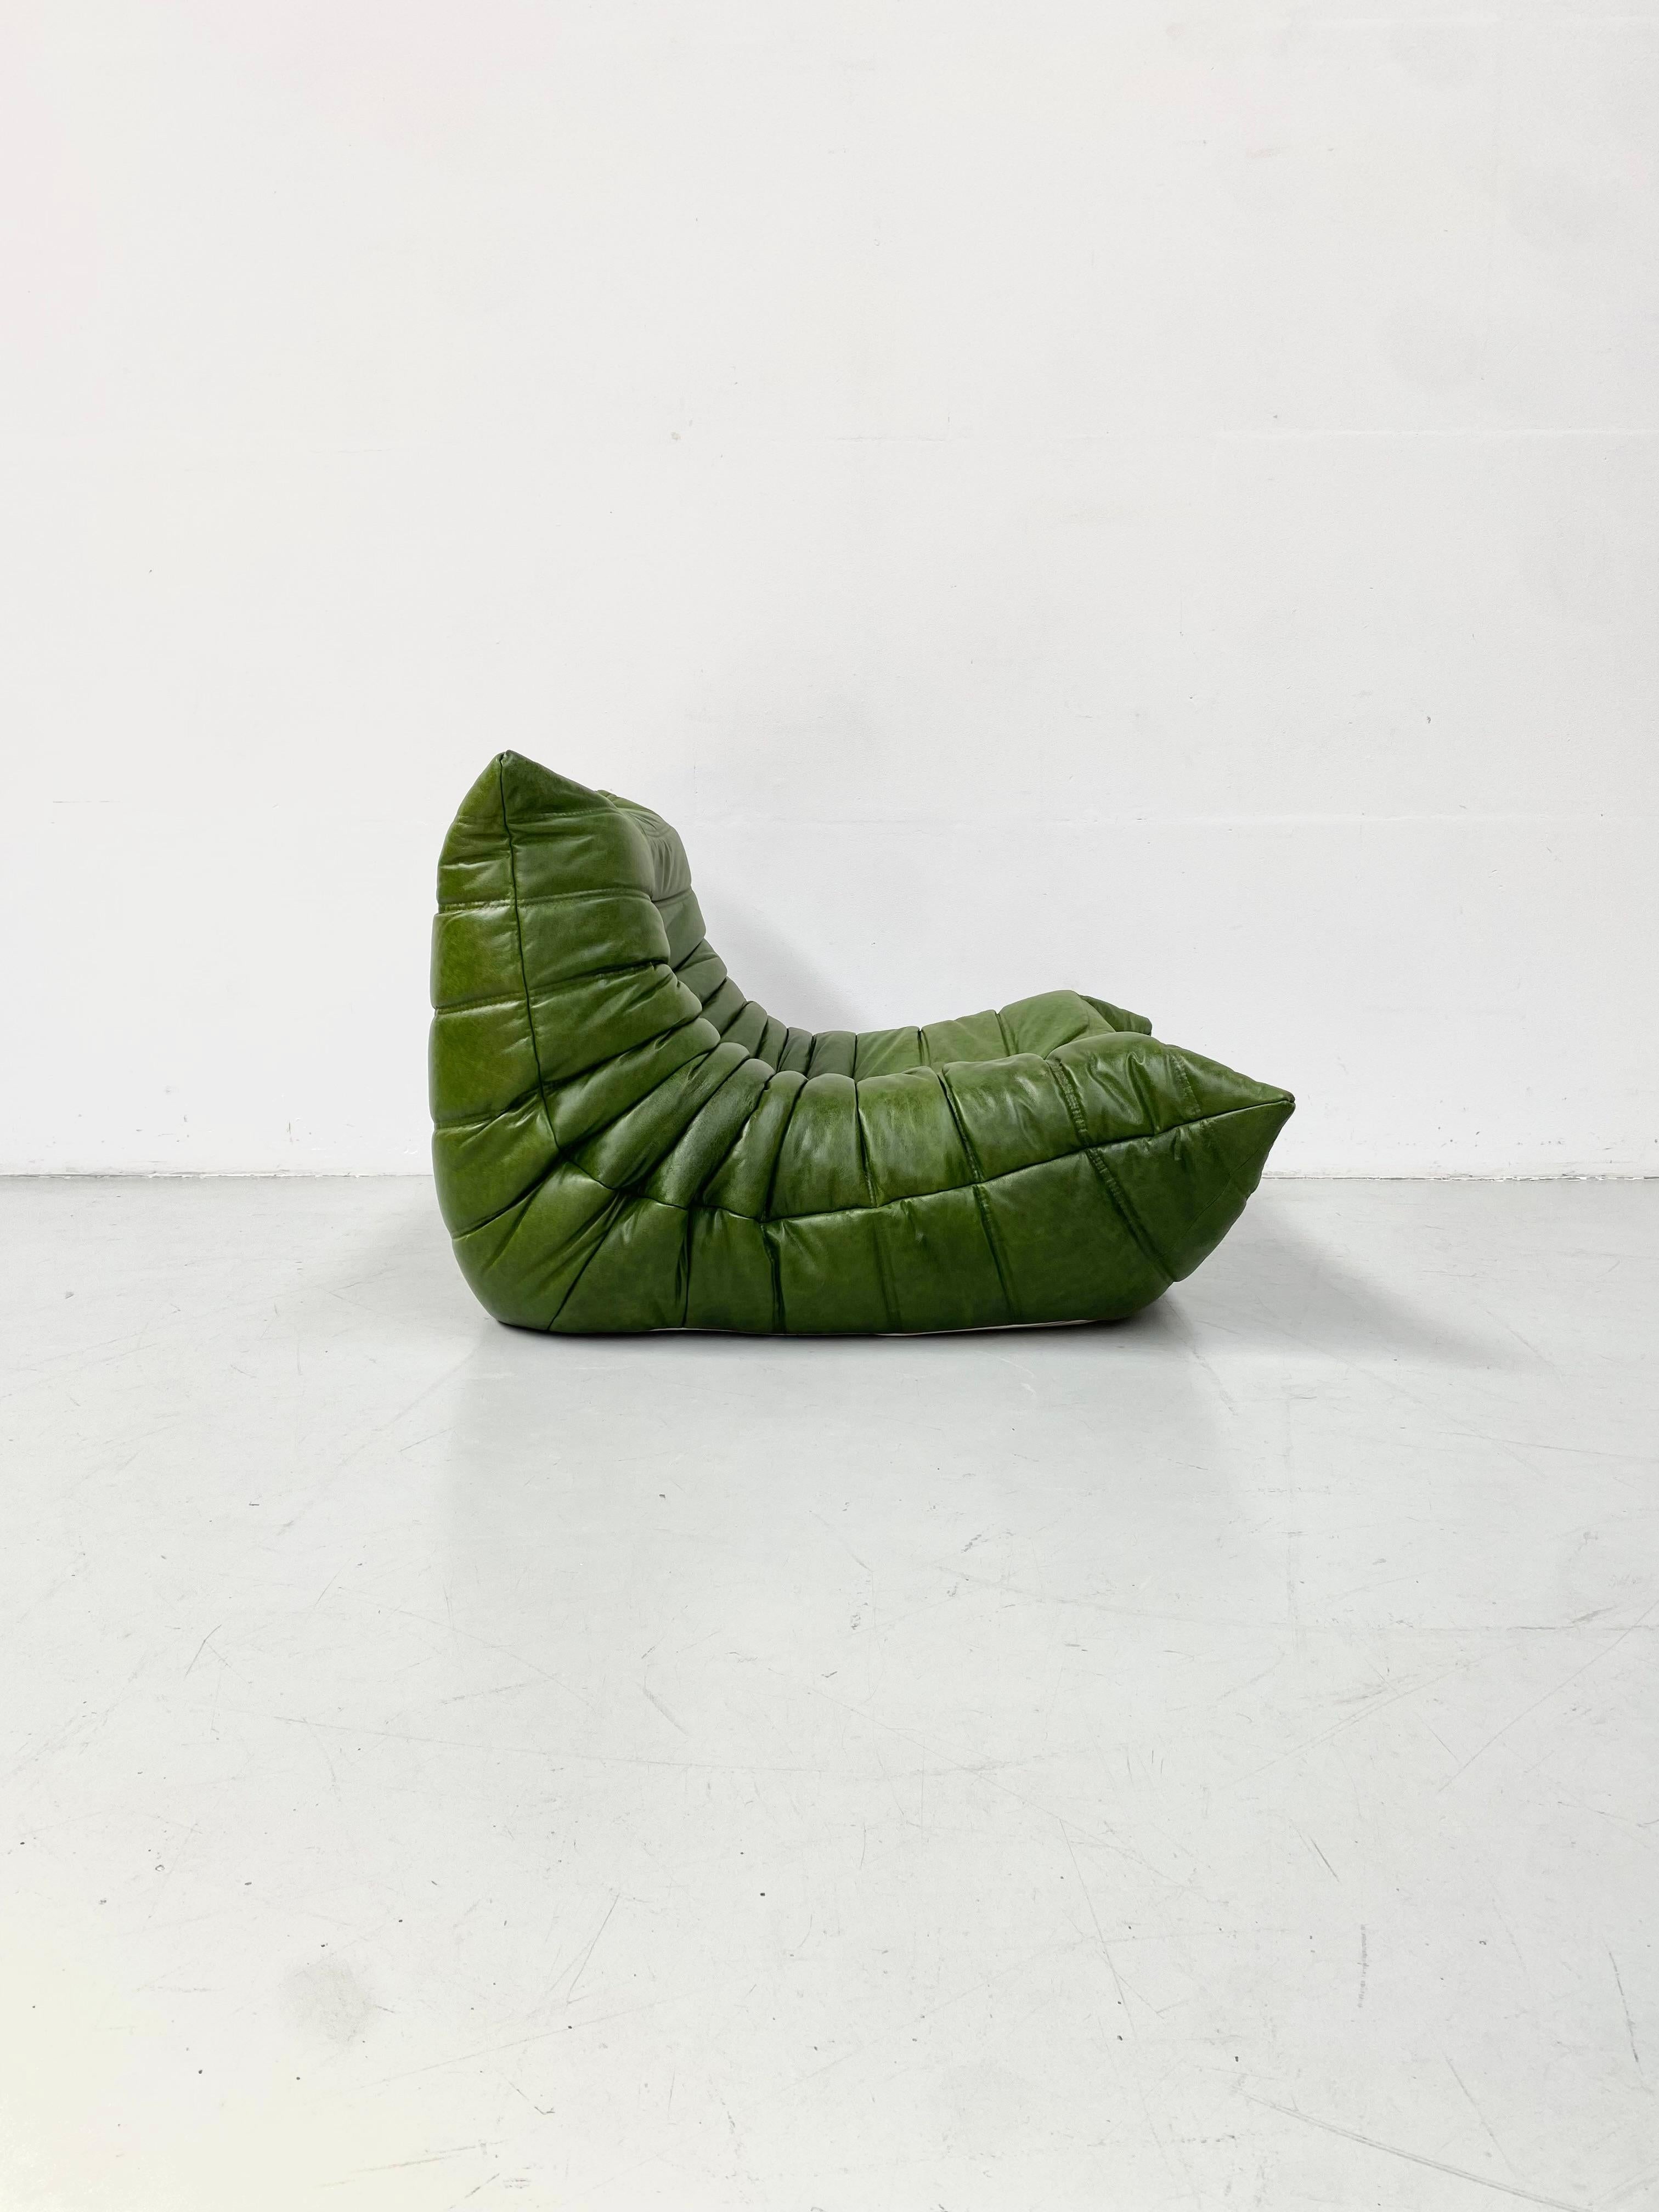 20th Century French Togo Chair in Green Leather by Michel Ducaroy for Ligne Roset, 1974.